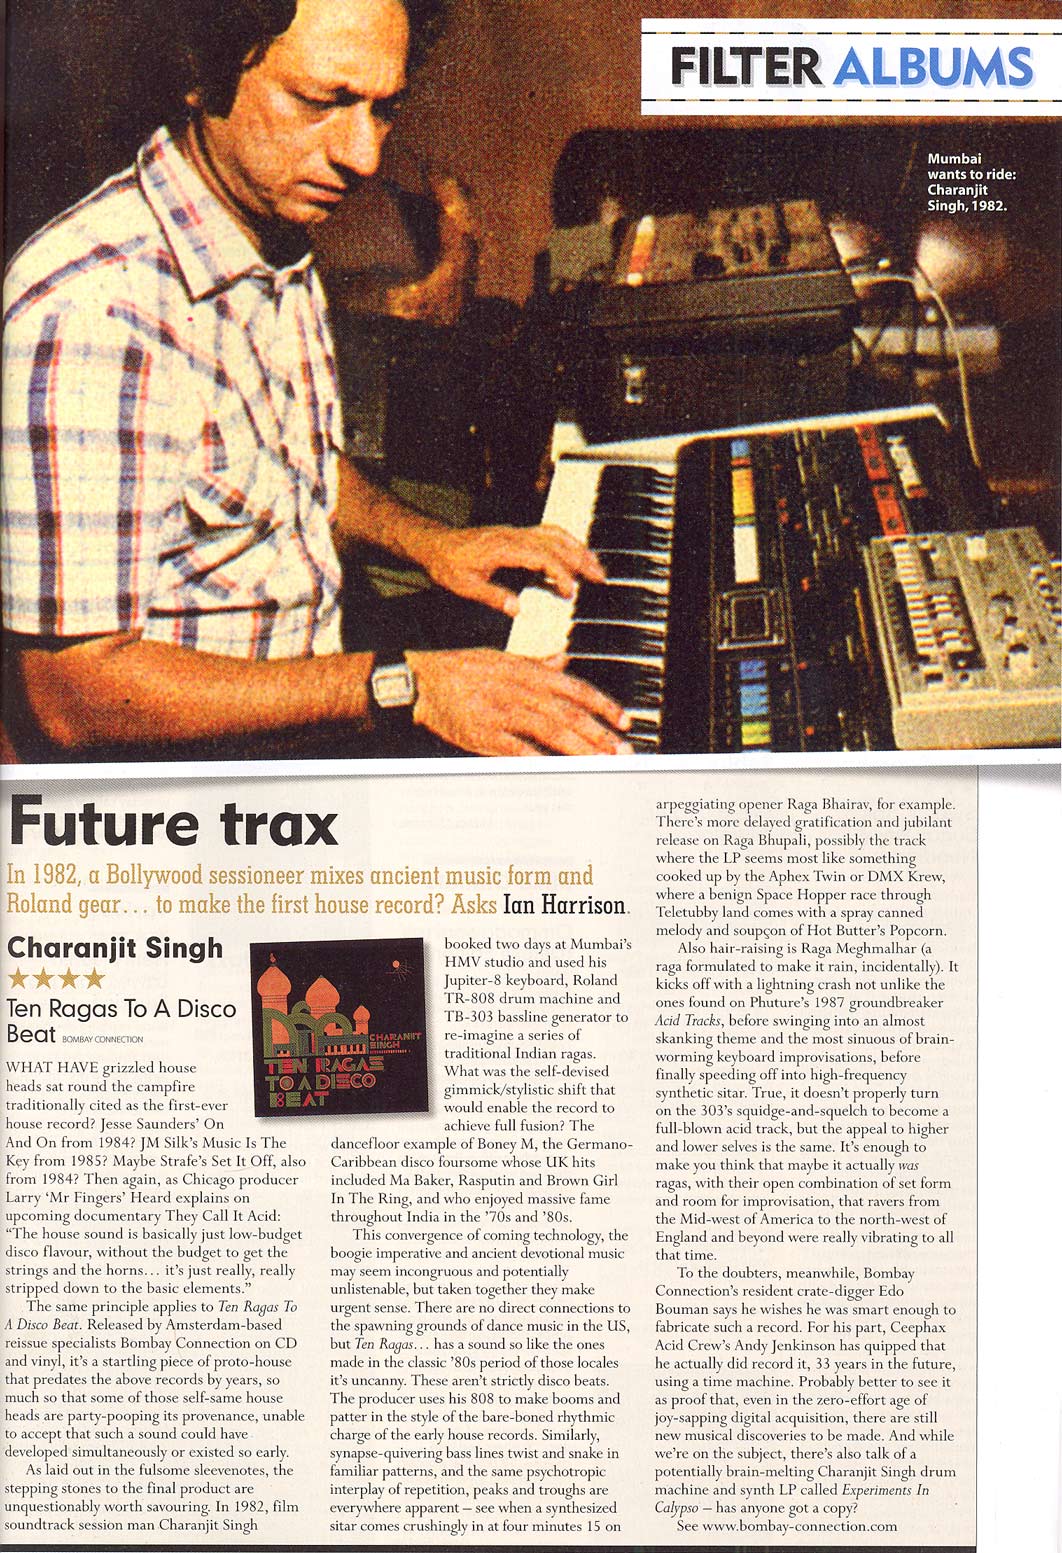 Scan of an article in Mojo magazine from 2010 alongside the reissue of Synthesizing - Ten Ragas to a Disco Beat that mentions the "Experiments in Calypso" album at the end